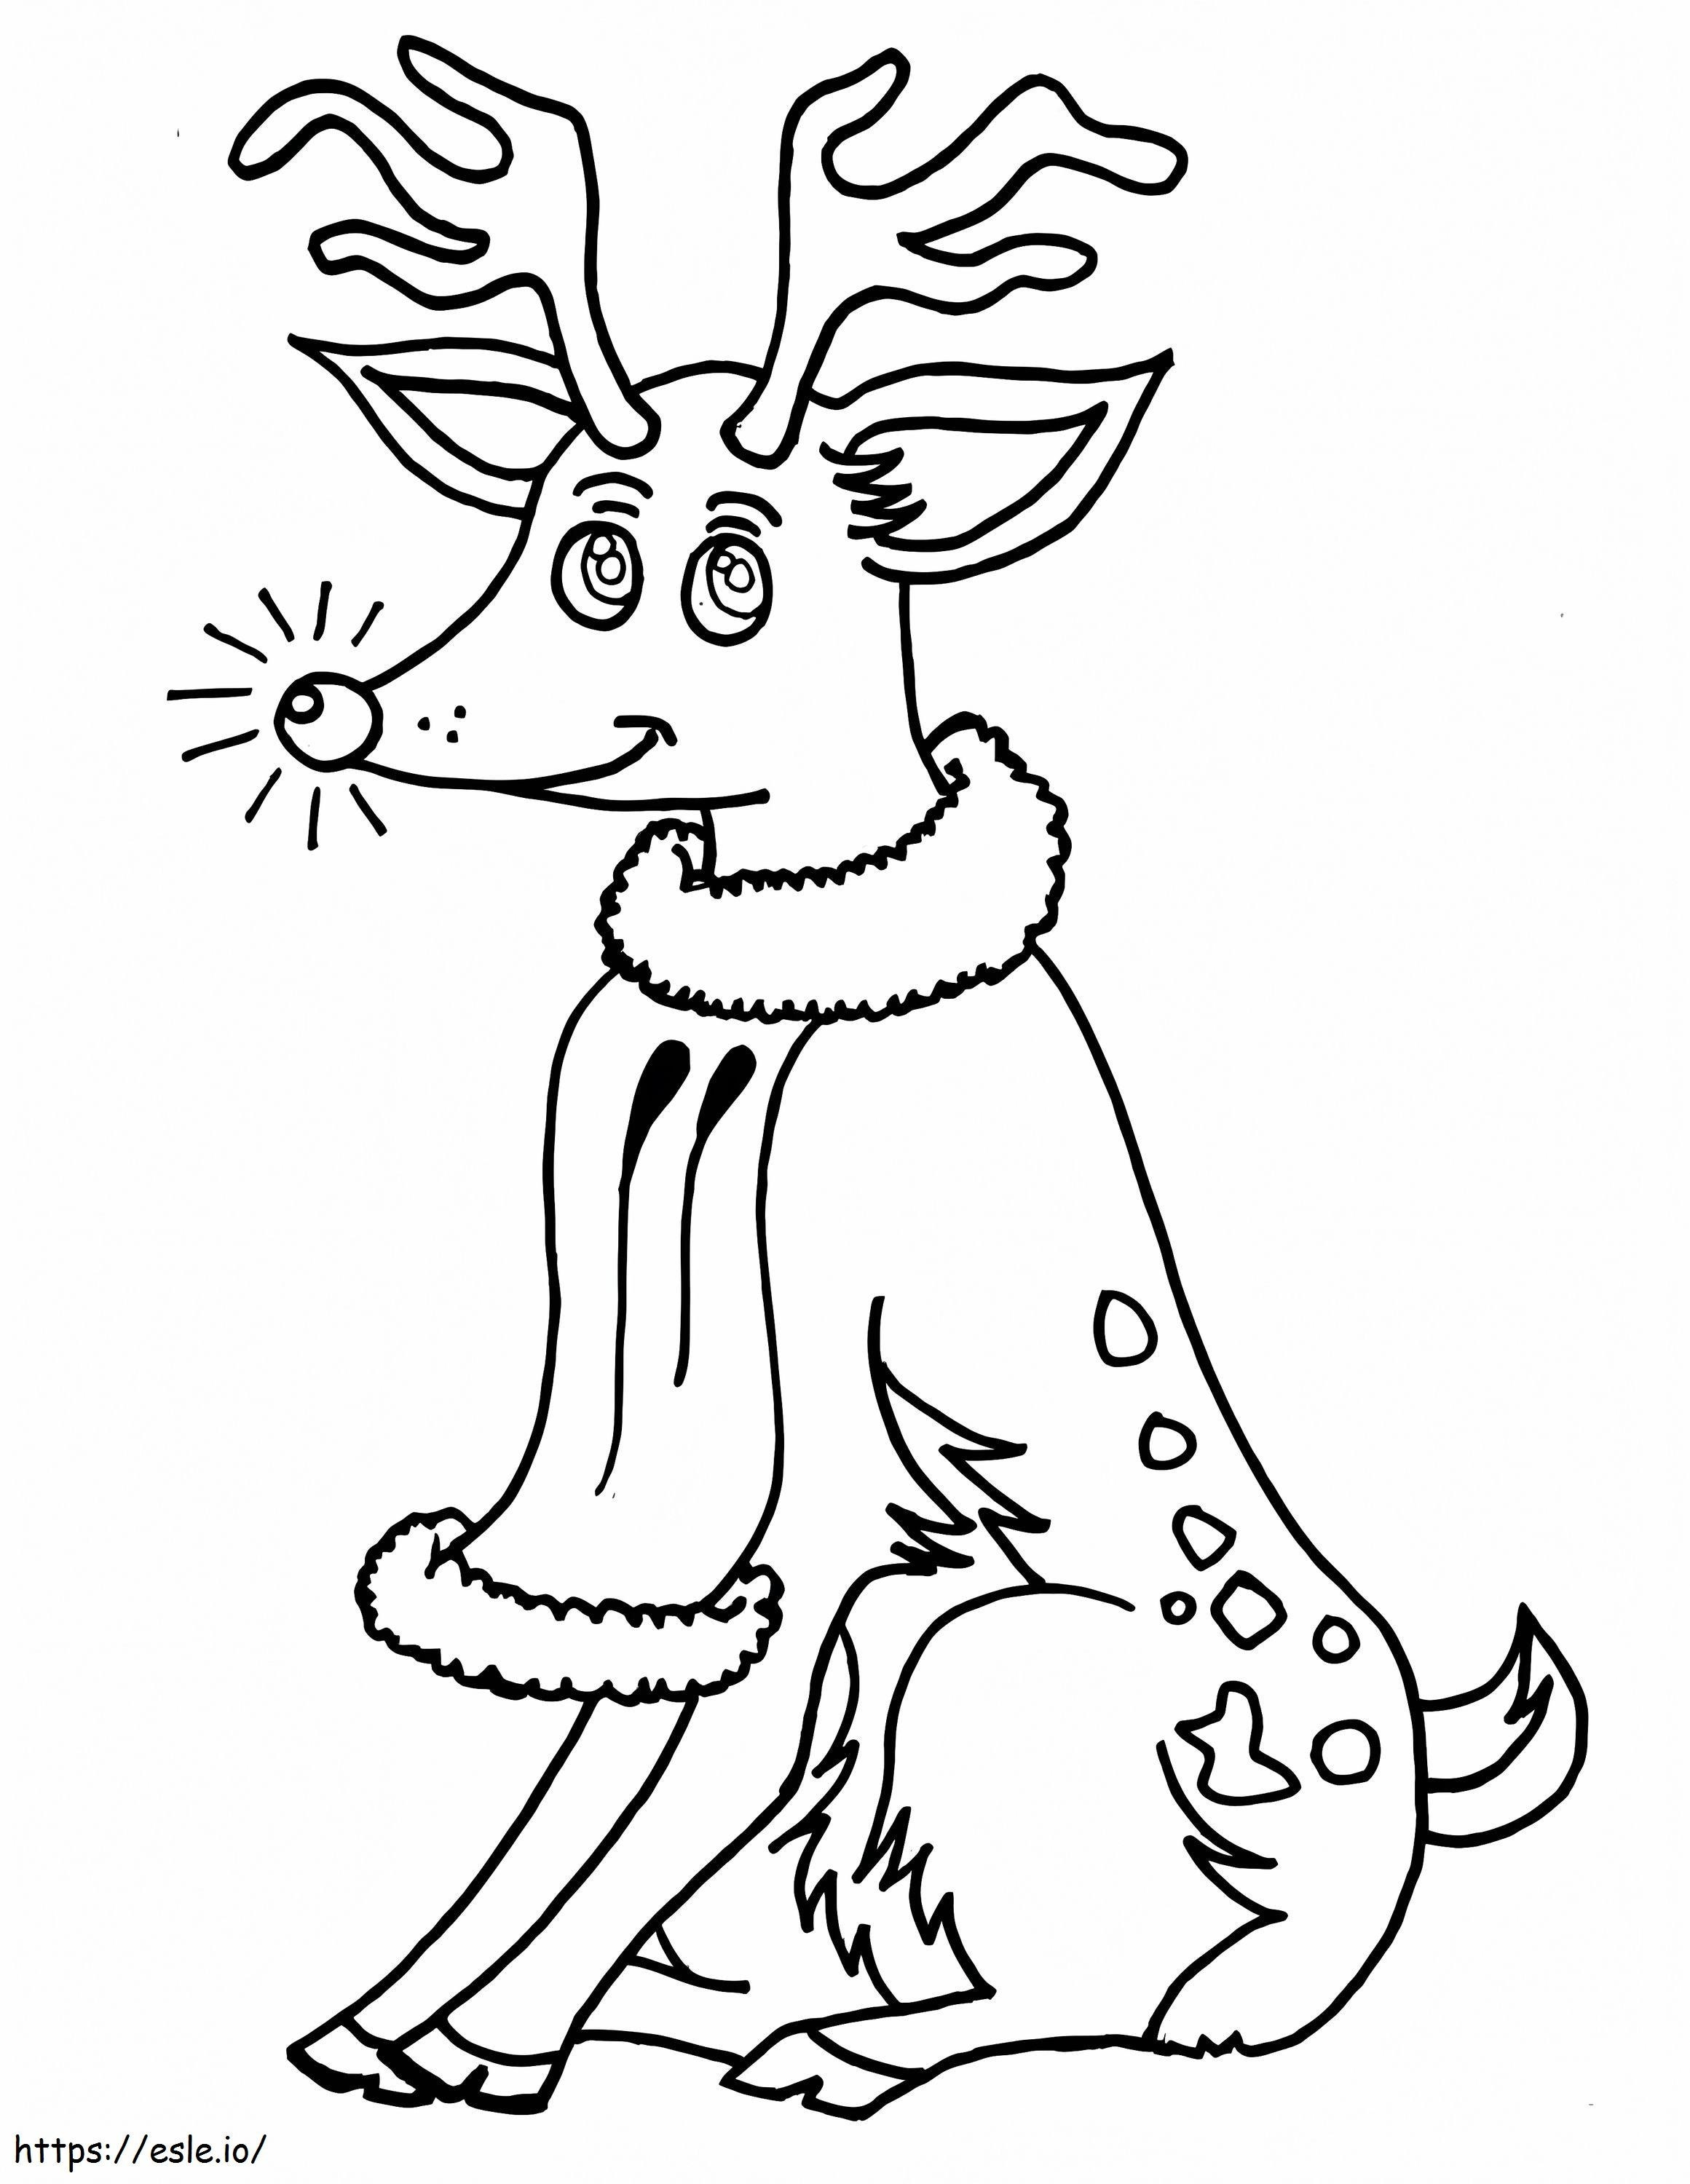 Reindeer With Beautiful Eyes coloring page